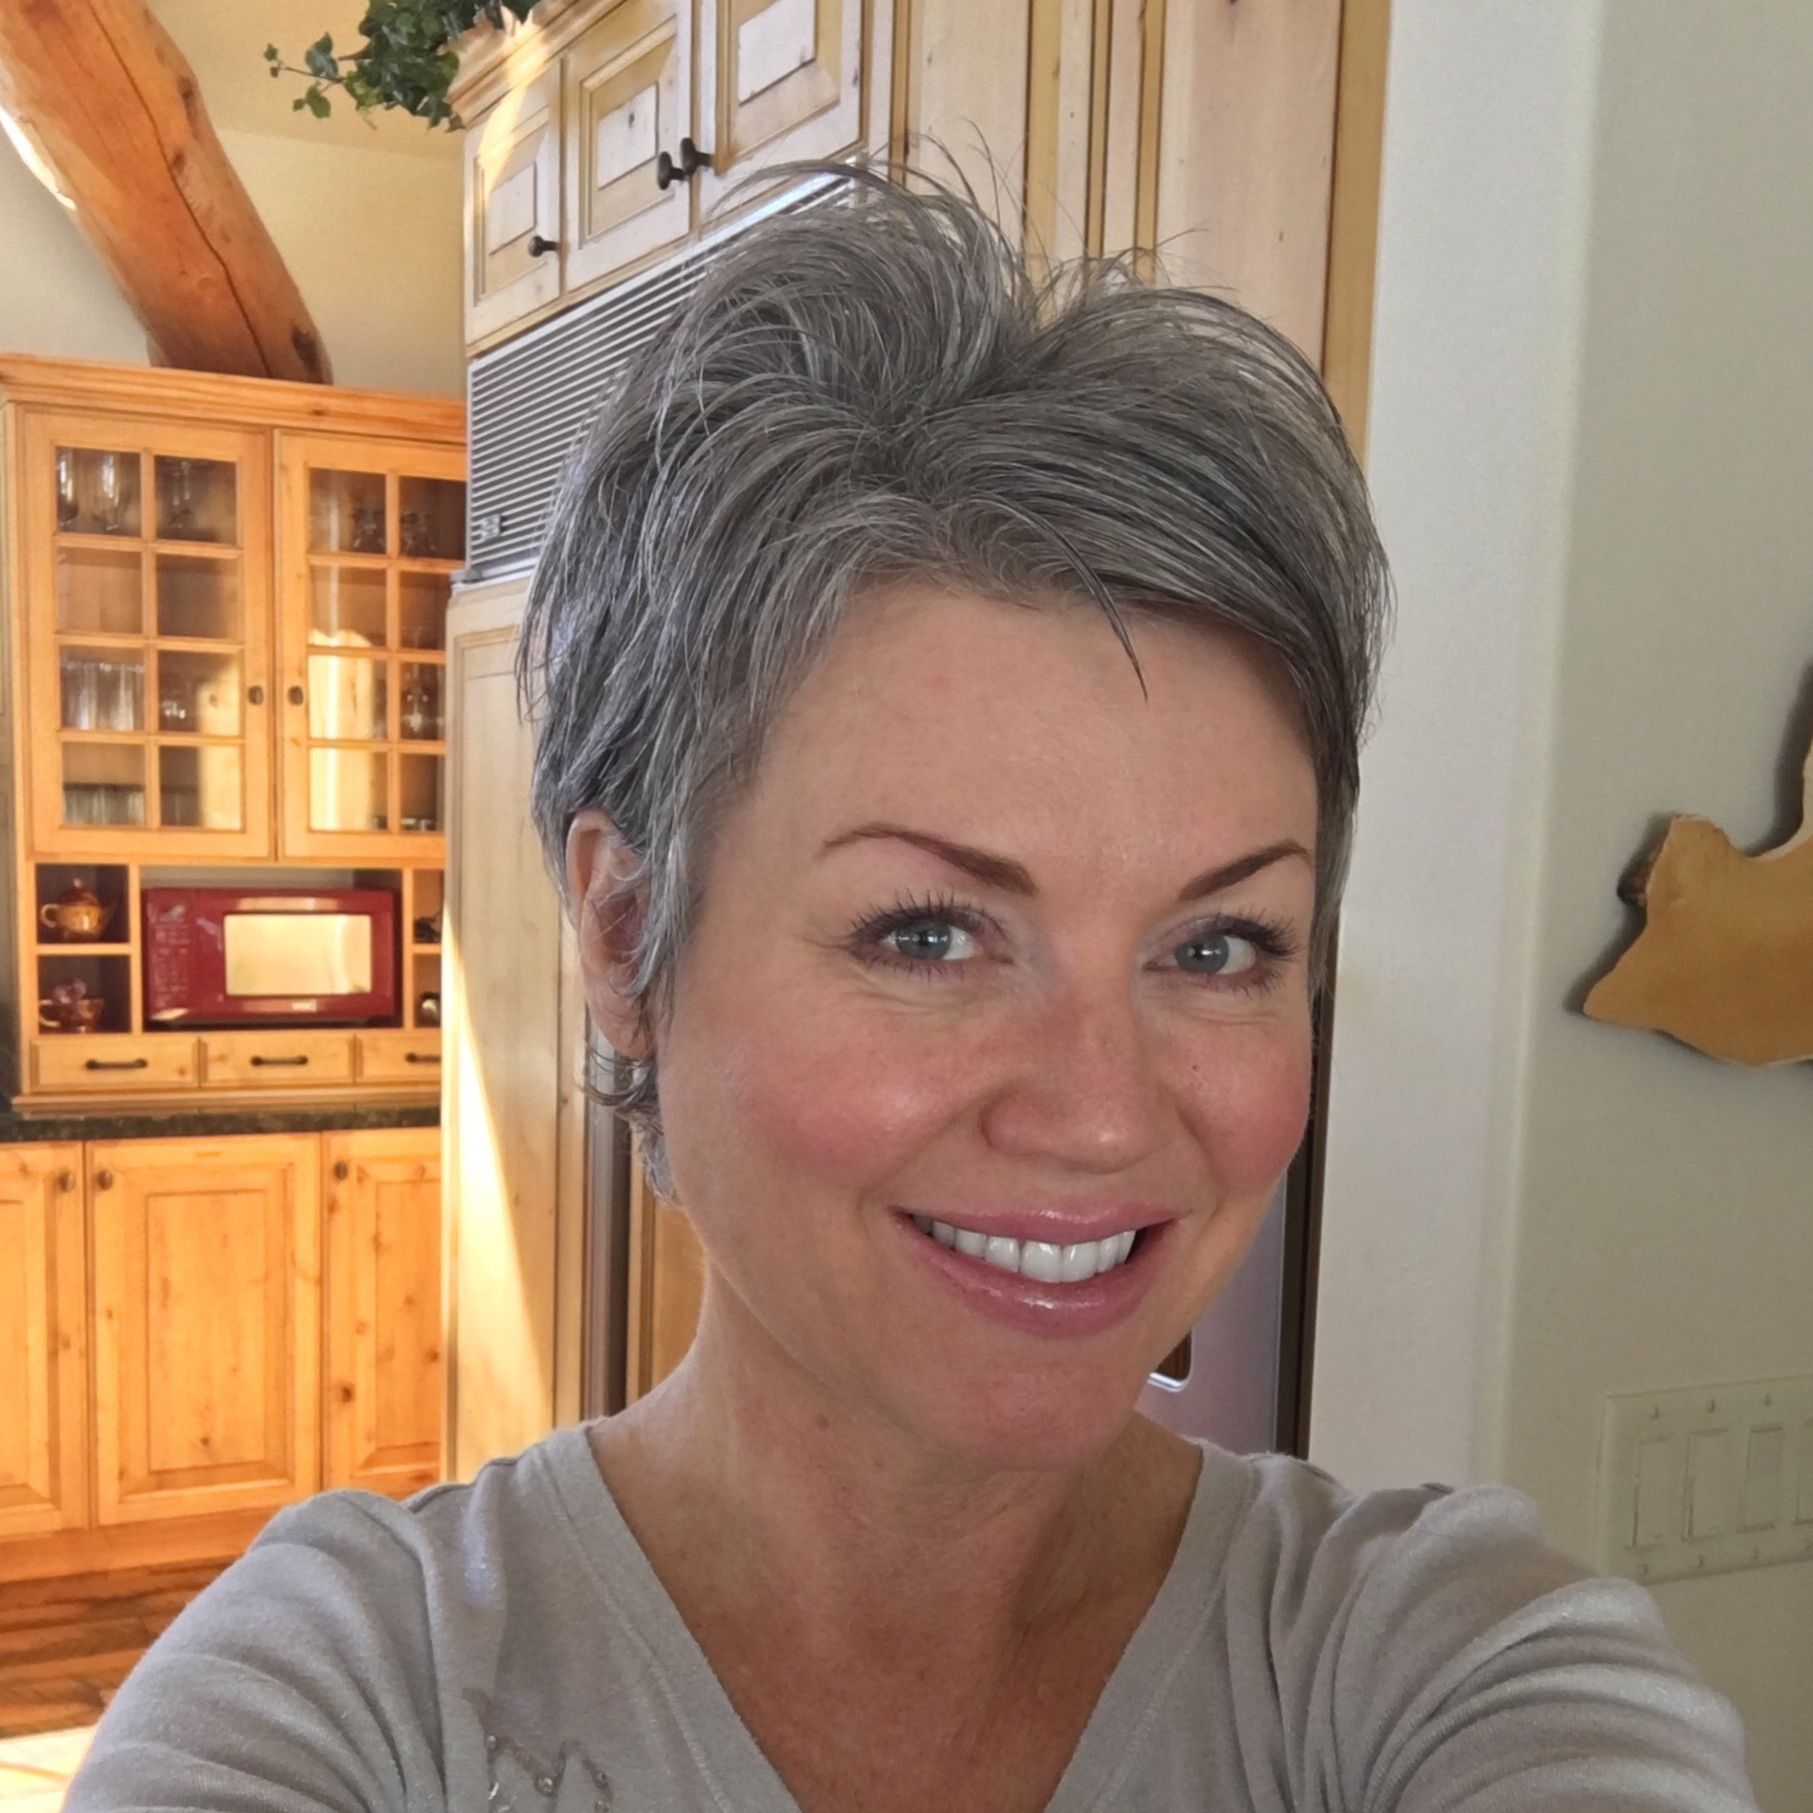 Shortgreyhair #pixie #lettingitgrow | Curly Hair, Long, Short And For 2018 Short Pixie Hairstyles For Gray Hair (View 13 of 15)